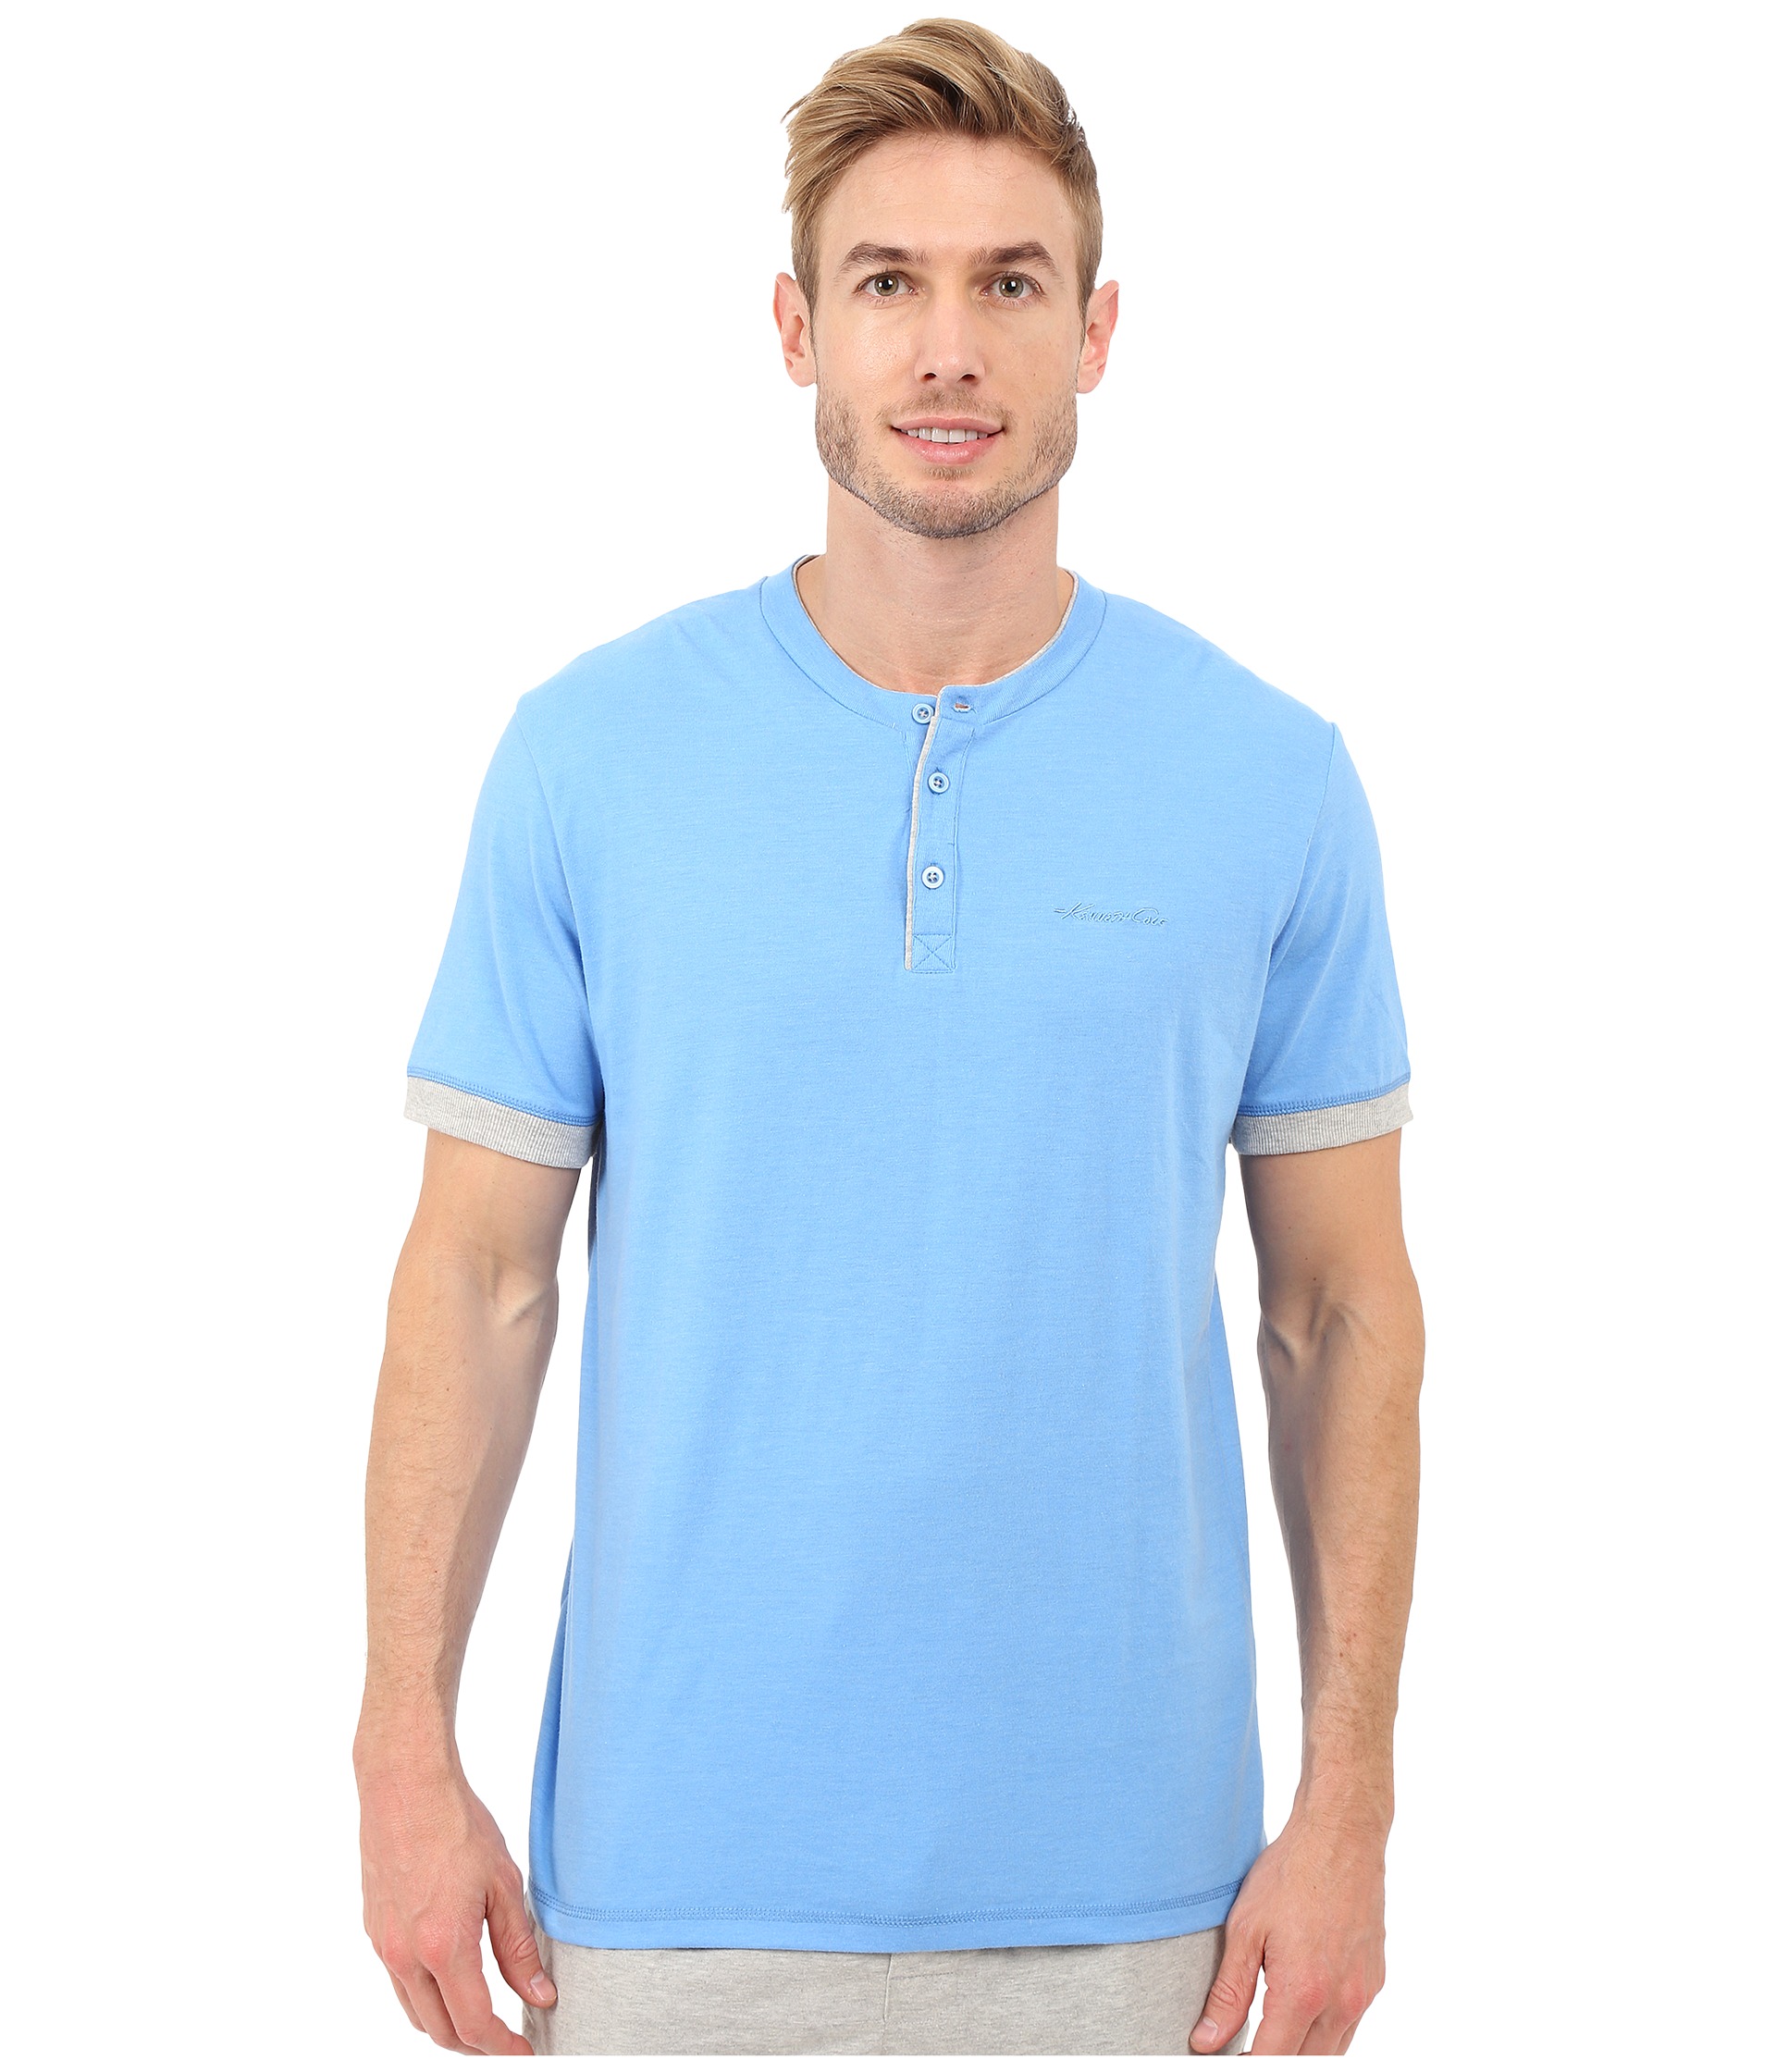 Kenneth Cole Reaction Henry Neck T-Shirt - Zappos.com Free Shipping ...